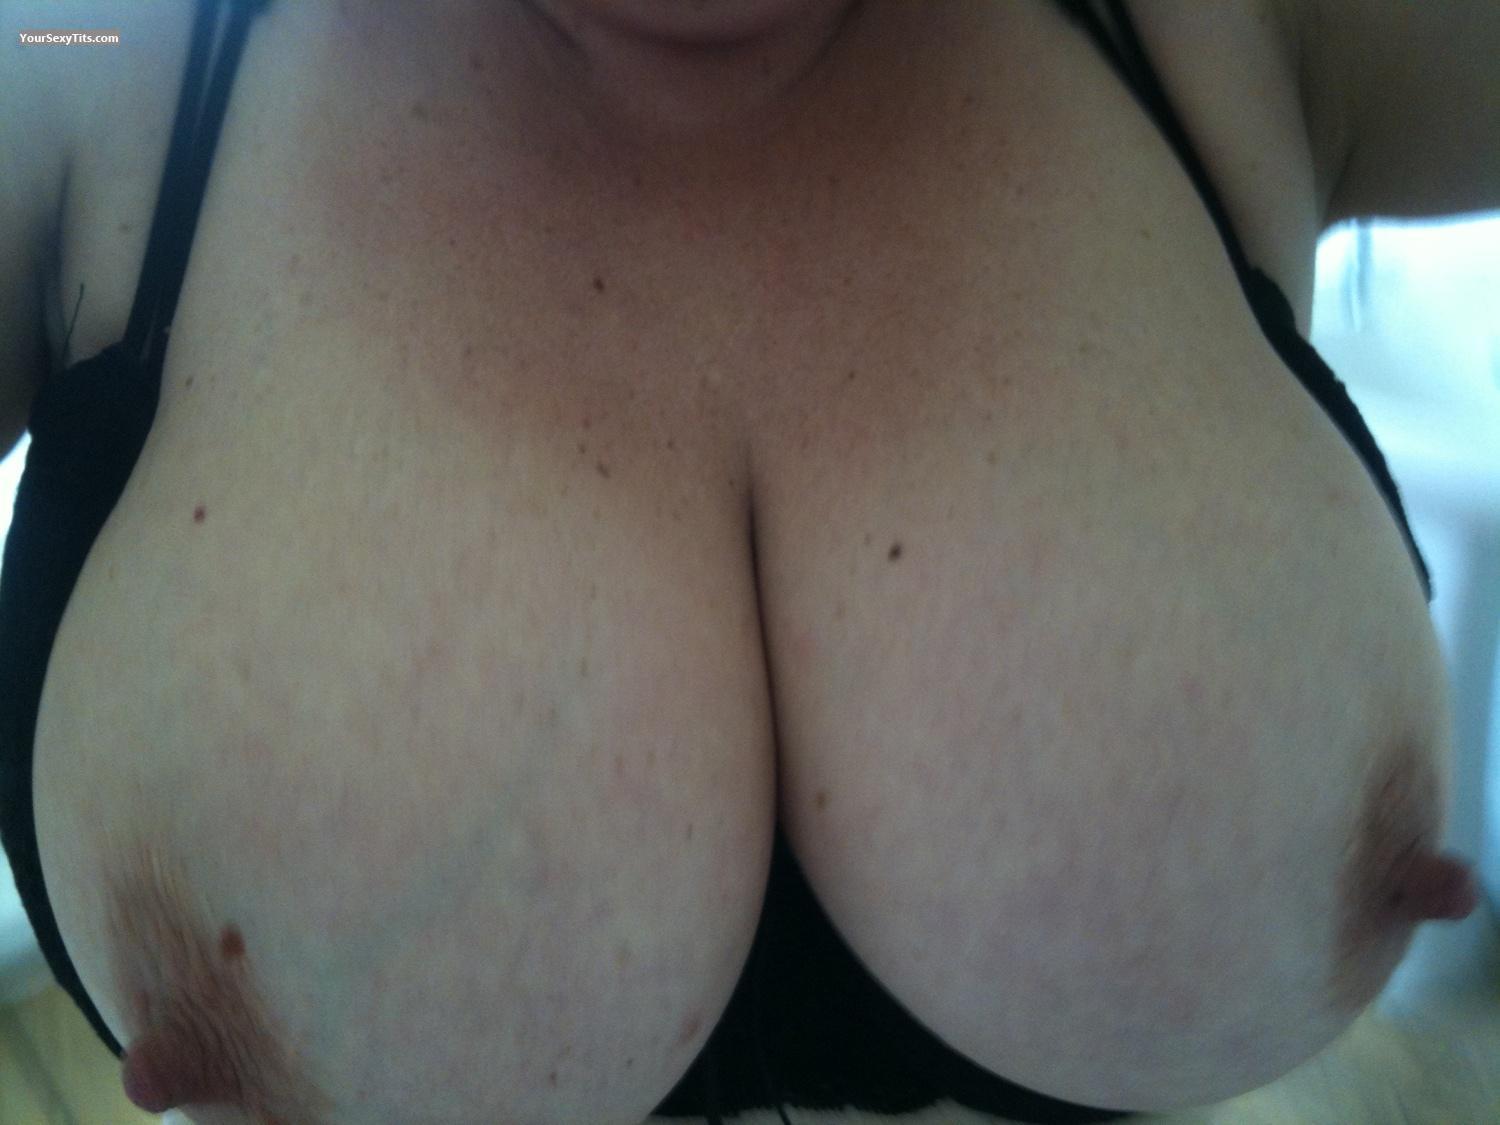 Tit Flash: My Extremely Big Tits By IPhone (Selfie) - Bouncy Lucy from United States